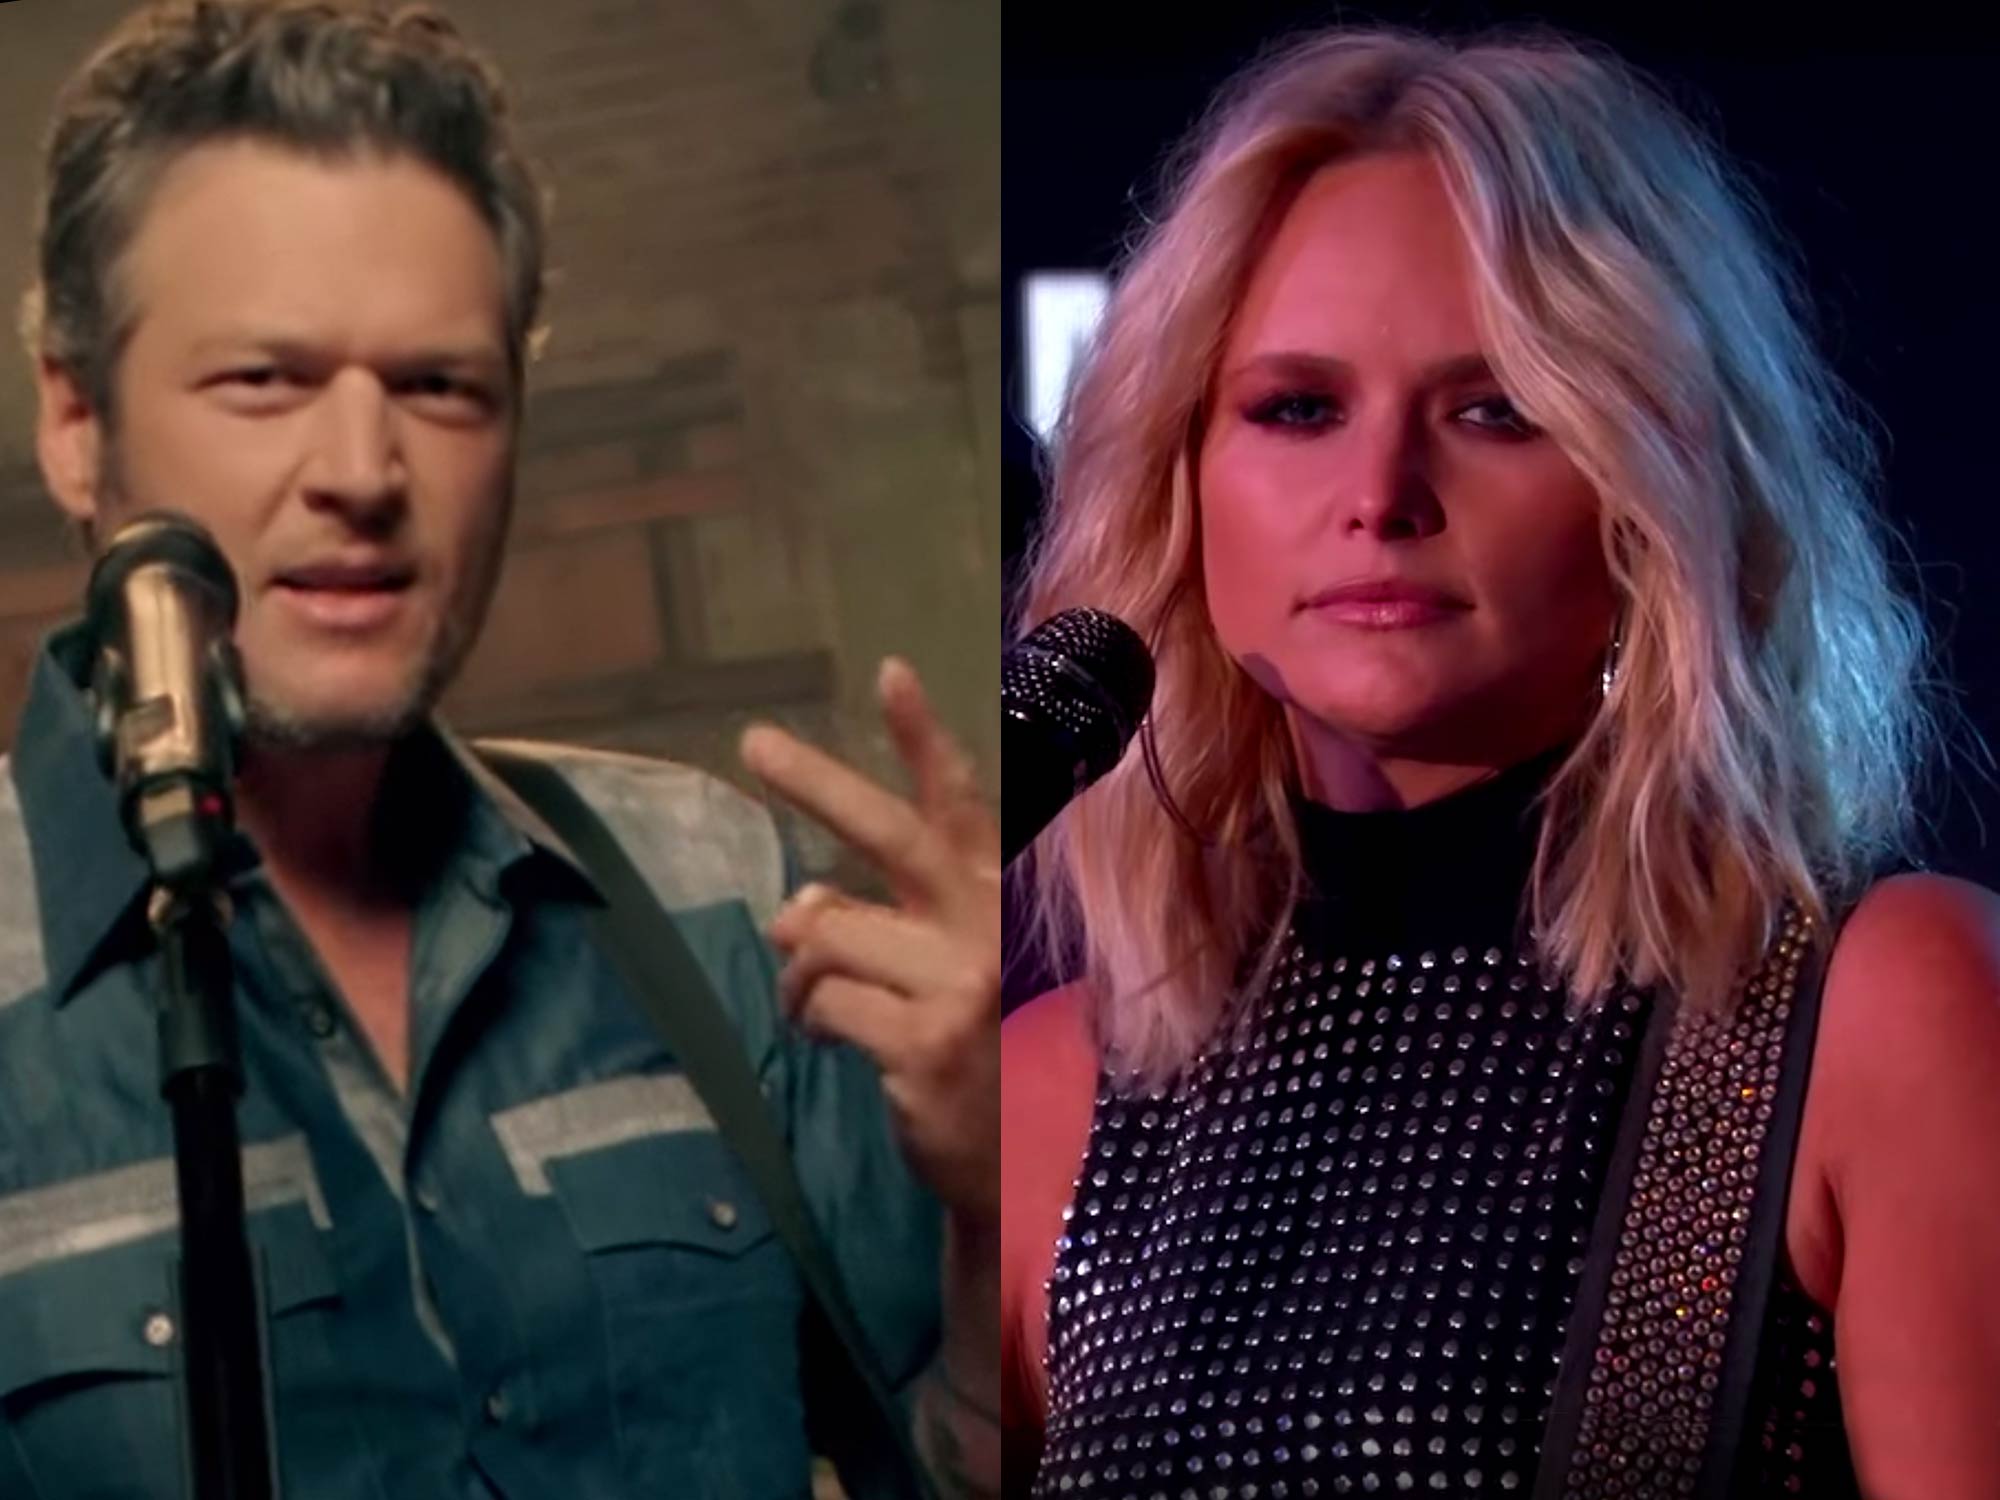 Vote Now: Better Post-Divorce Song—Blake’s “She’s Got a Way With Words” or Miranda’s “Vice”